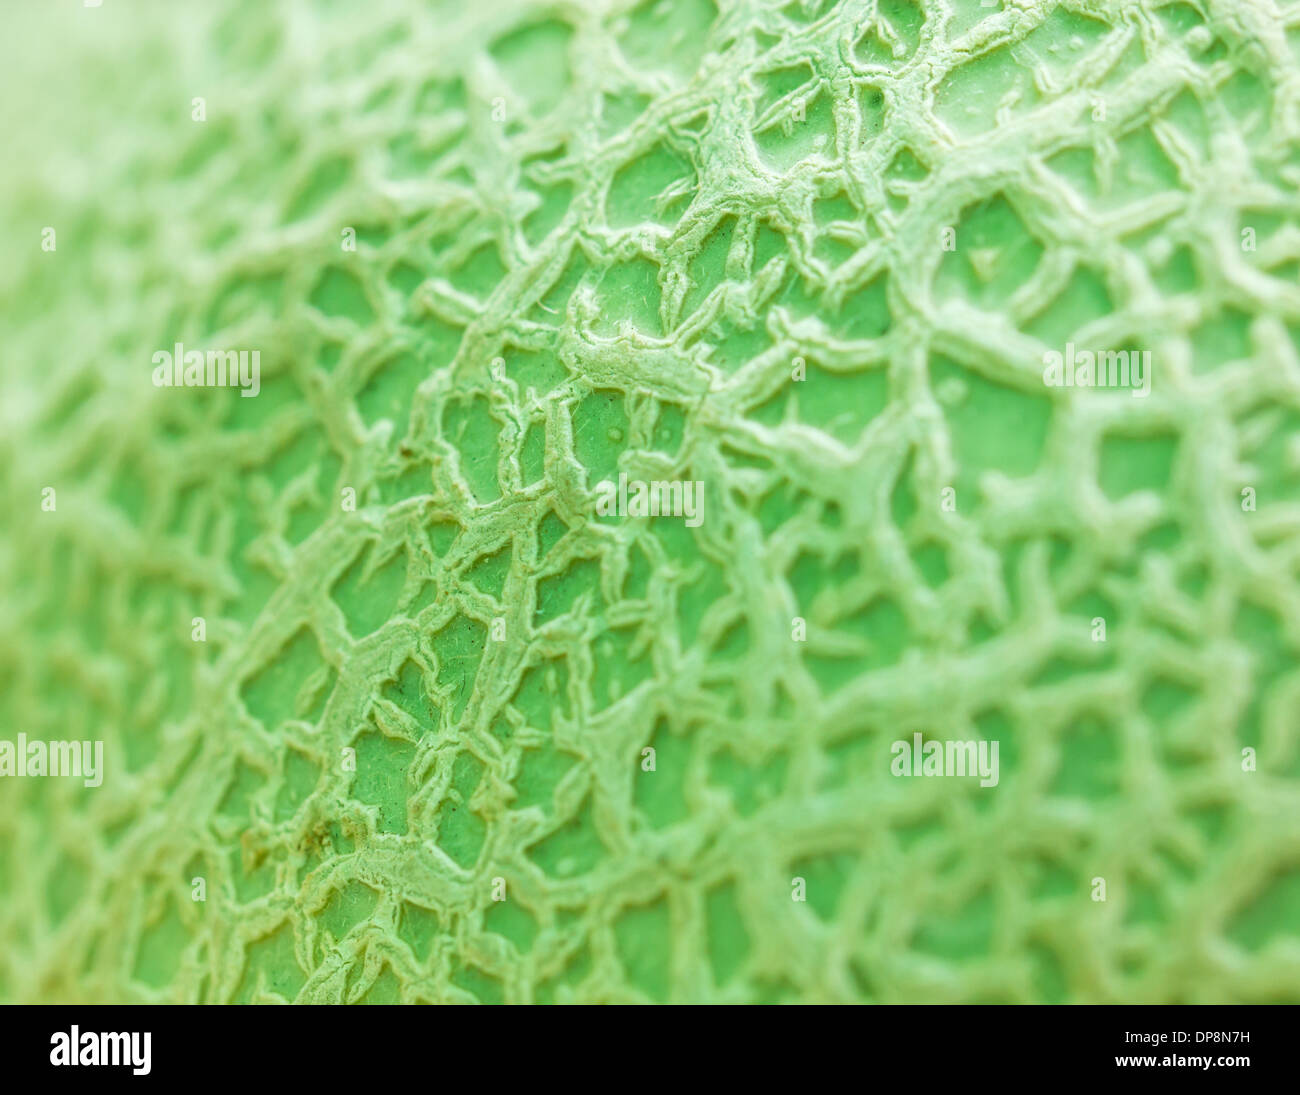 Japanese melon surface can be use as background Stock Photo